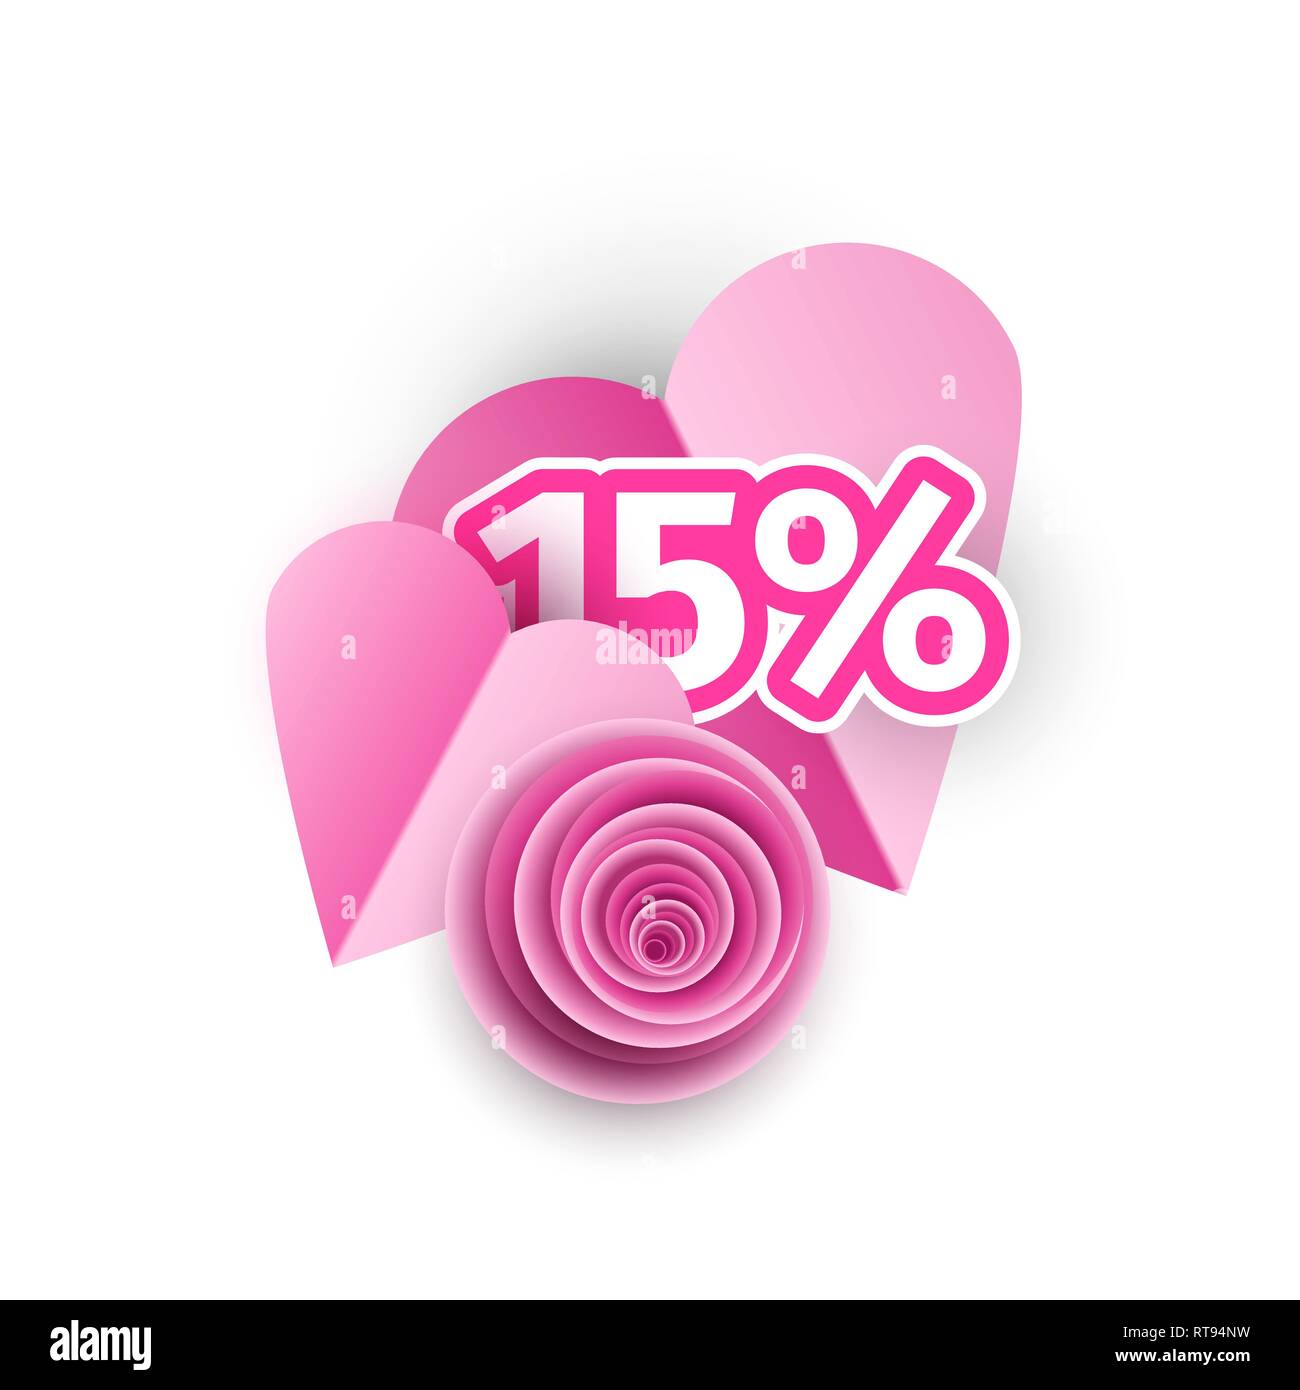 Heart, rose bud 3d papercut illustration. Pink blossom isolated origami volumetric composition. Discount, special offer clipart. International womens, Spacial Offer 15 percent sale poster design Stock Vector